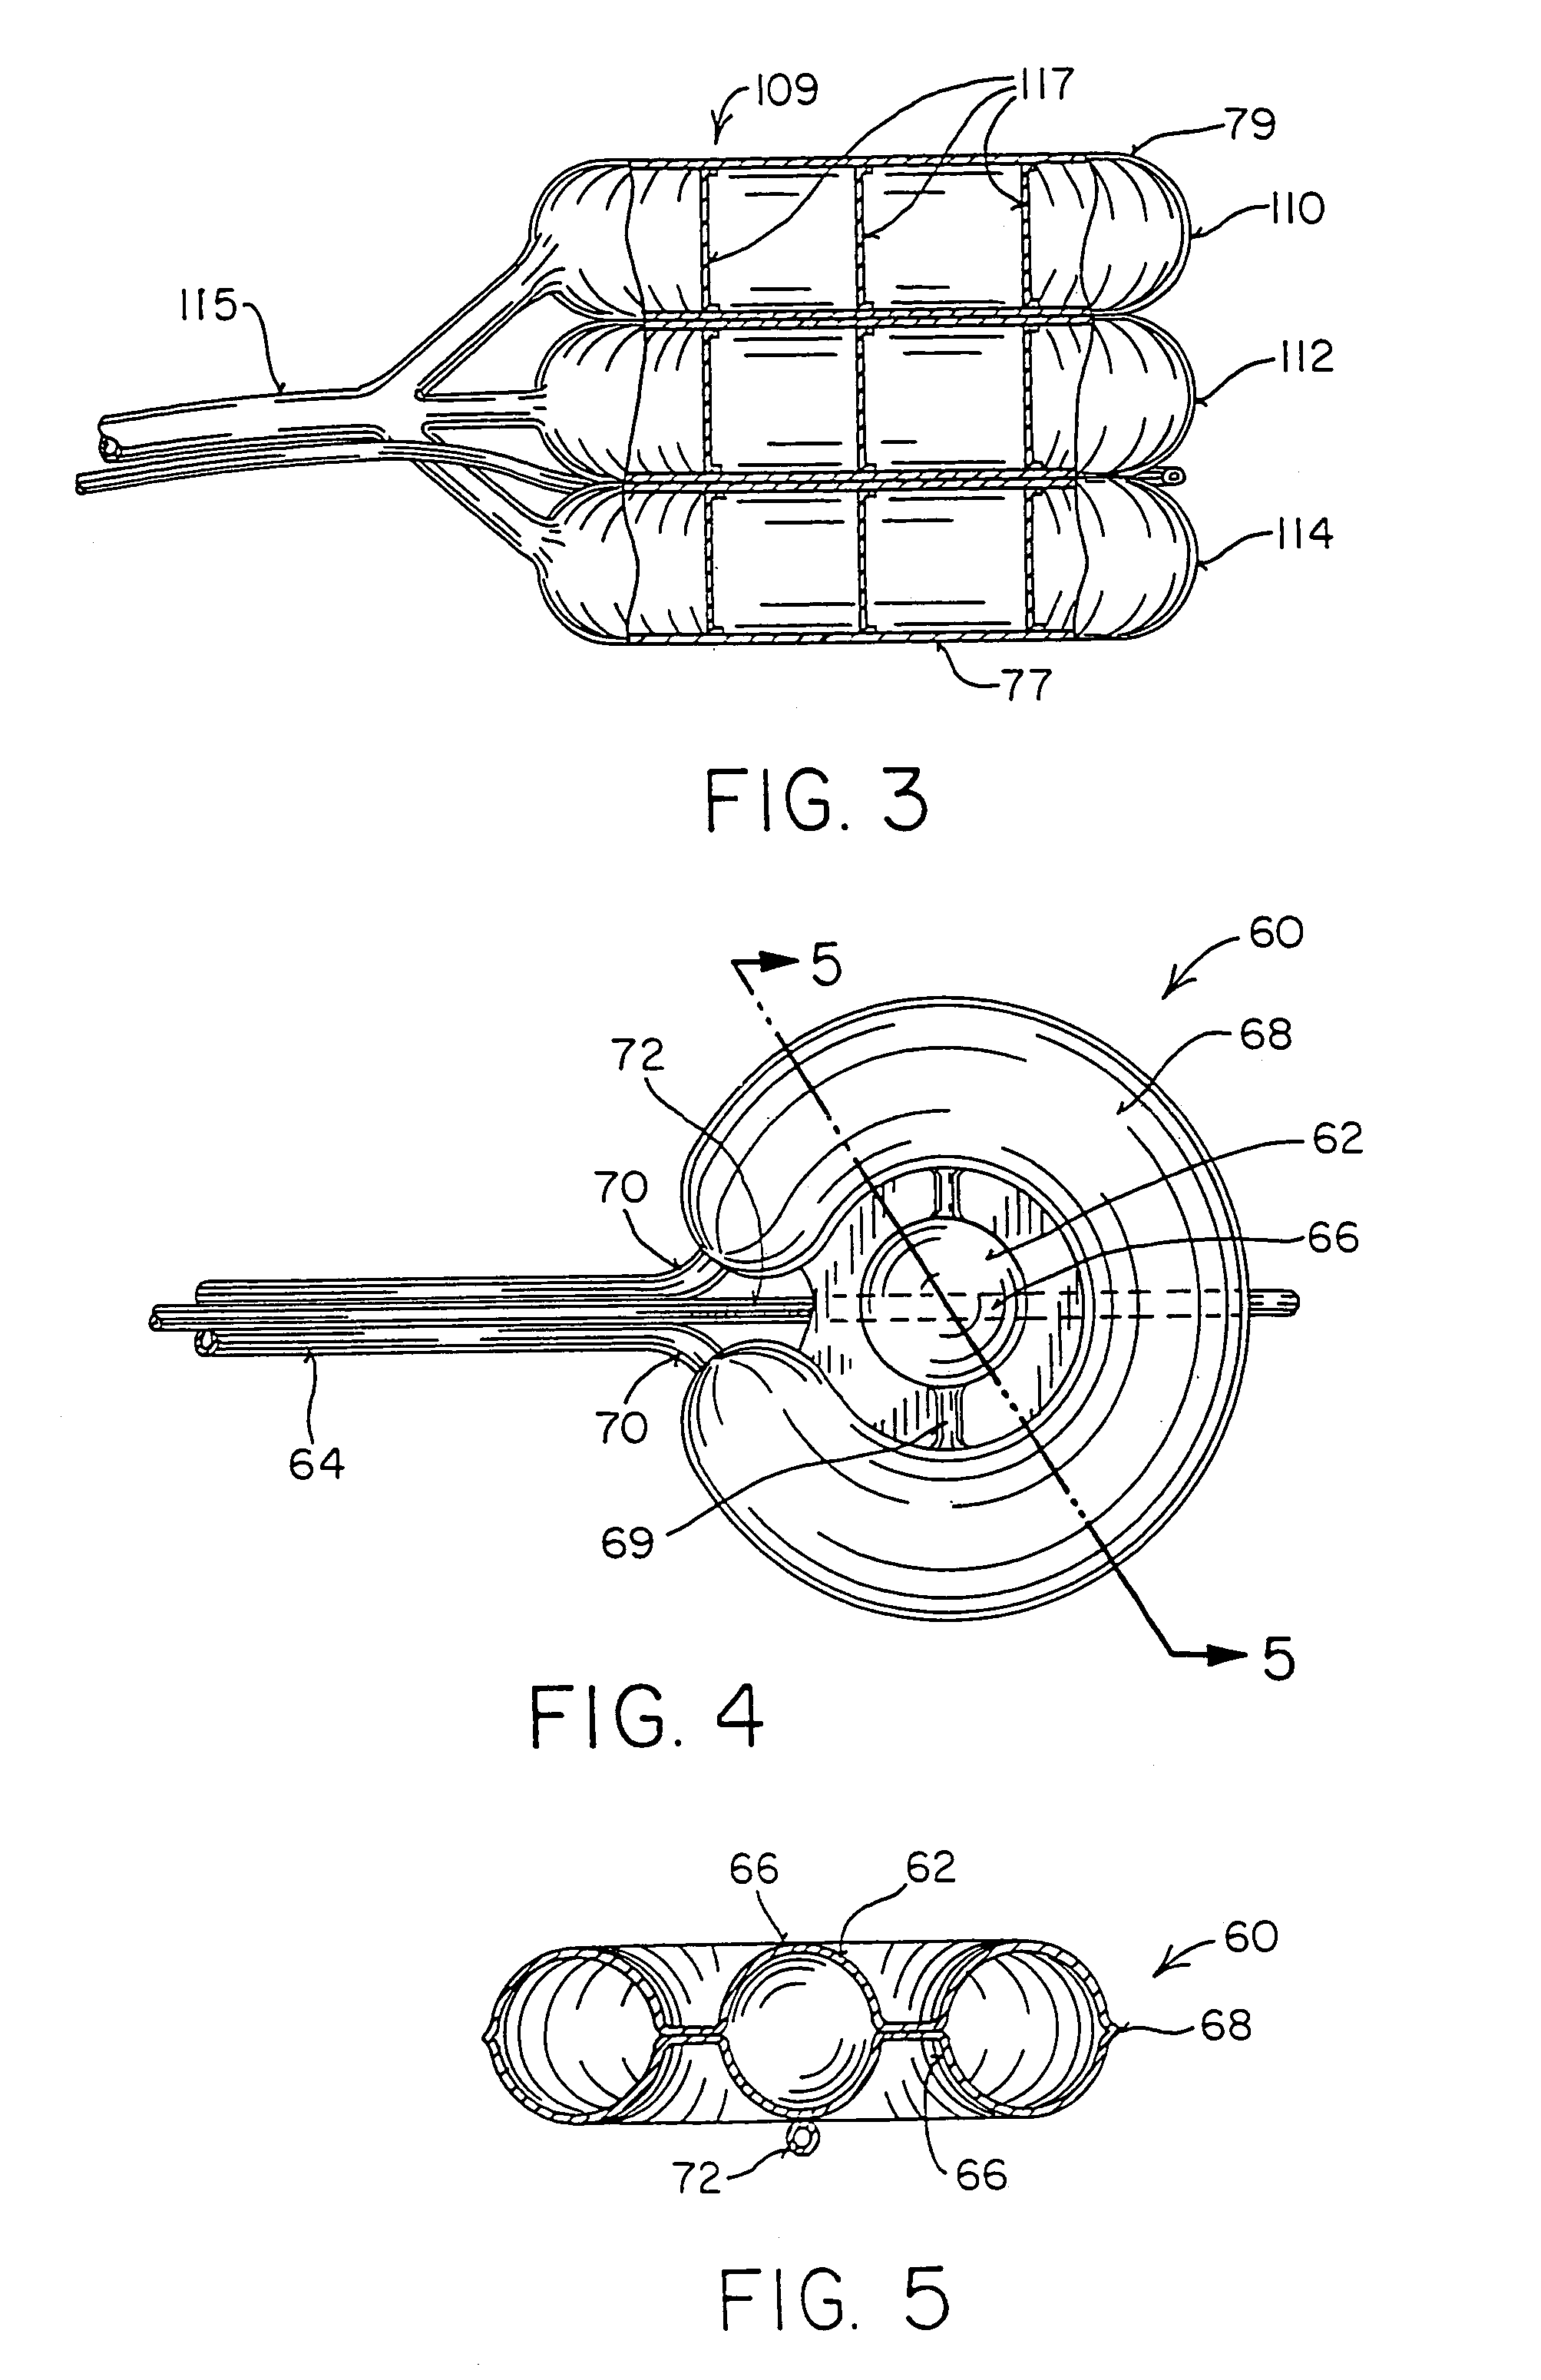 Inflatable device for use in surgical protocol relating to fixation of bone